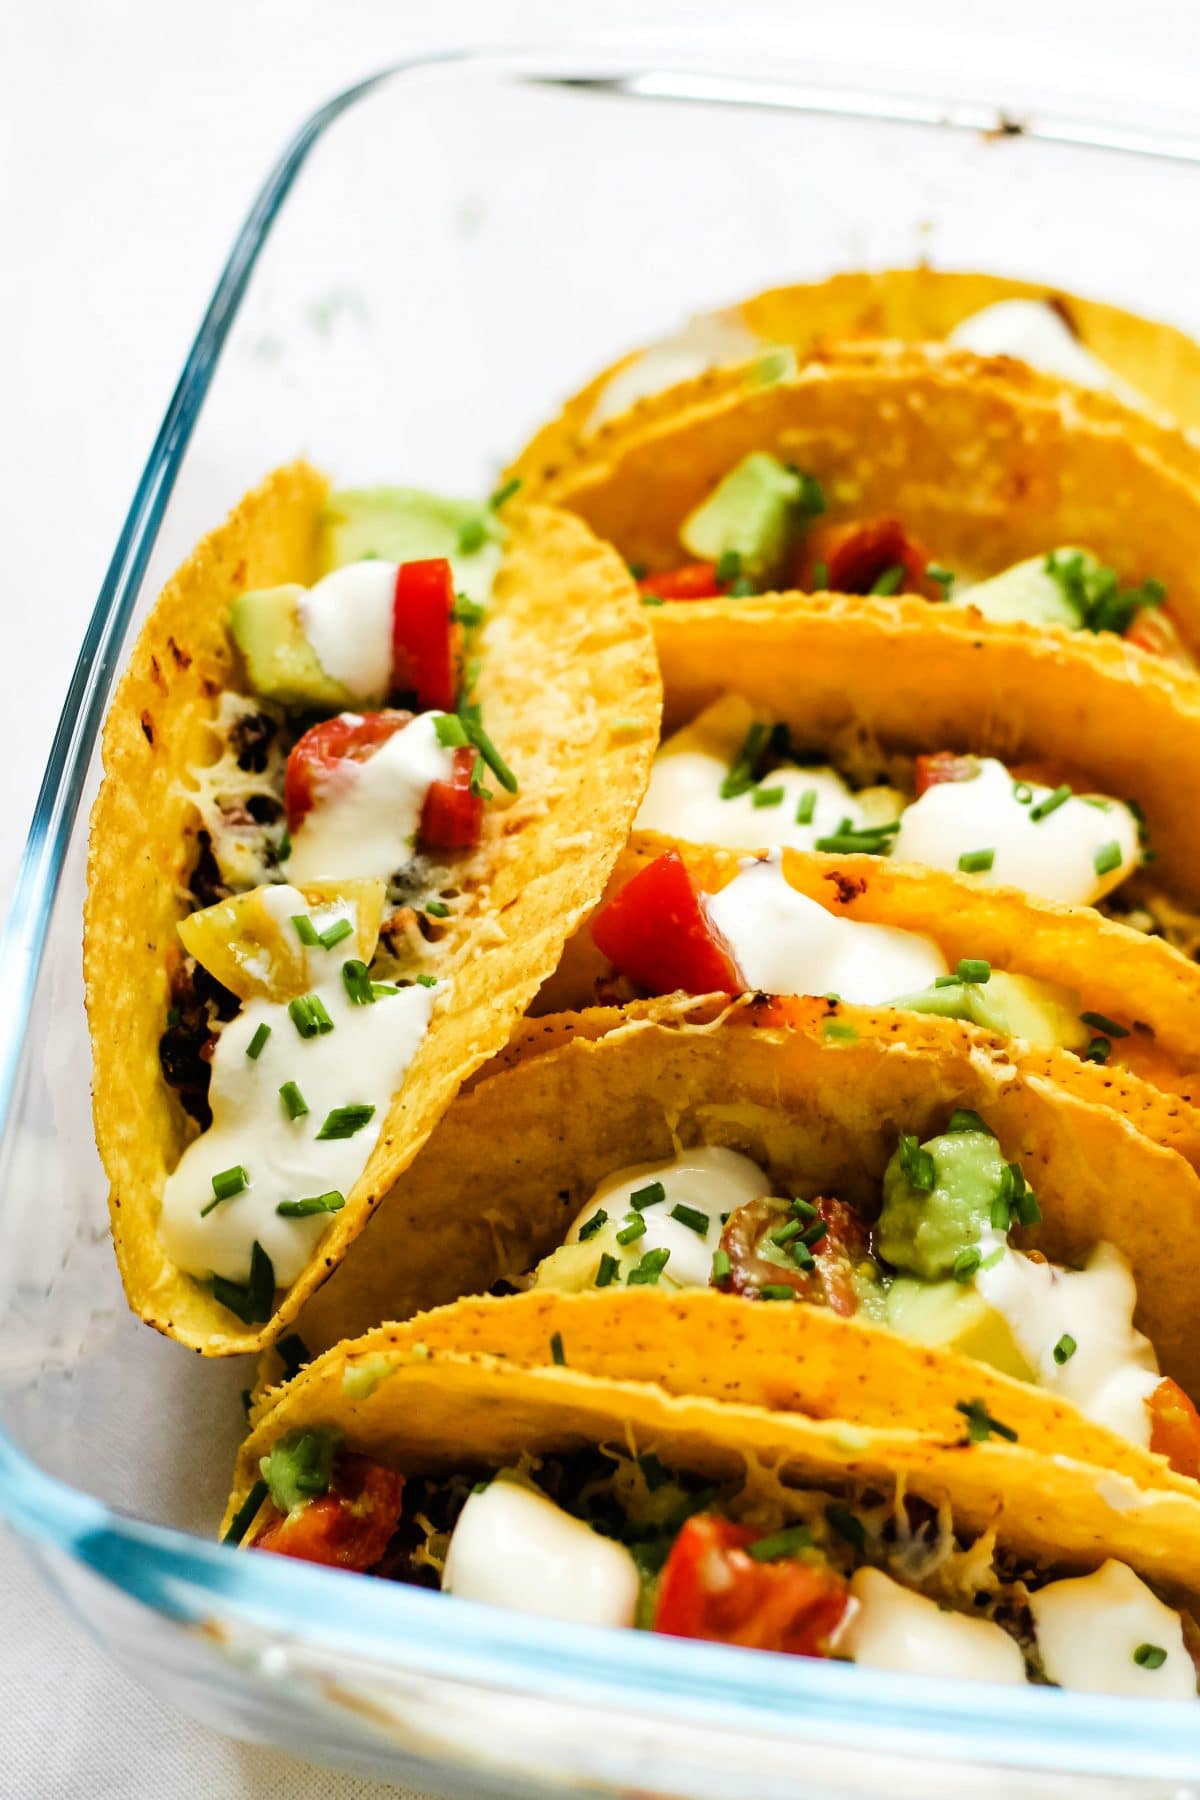 A simple 20 minute vegetarian taco dinner with black beans, smoked cheese and a fresh cherry tomato avocado salsa topping. Oven baked tacos are such a simple dinner, giving you extra crispy shells, melted cheese and a smoother workflow. Using smoked cheddar is an easy way to take classic bean and cheese tacos to the next level, making them completely irresistible! #tacos #vegetarianrecipes #easydinners #meatlessmonday